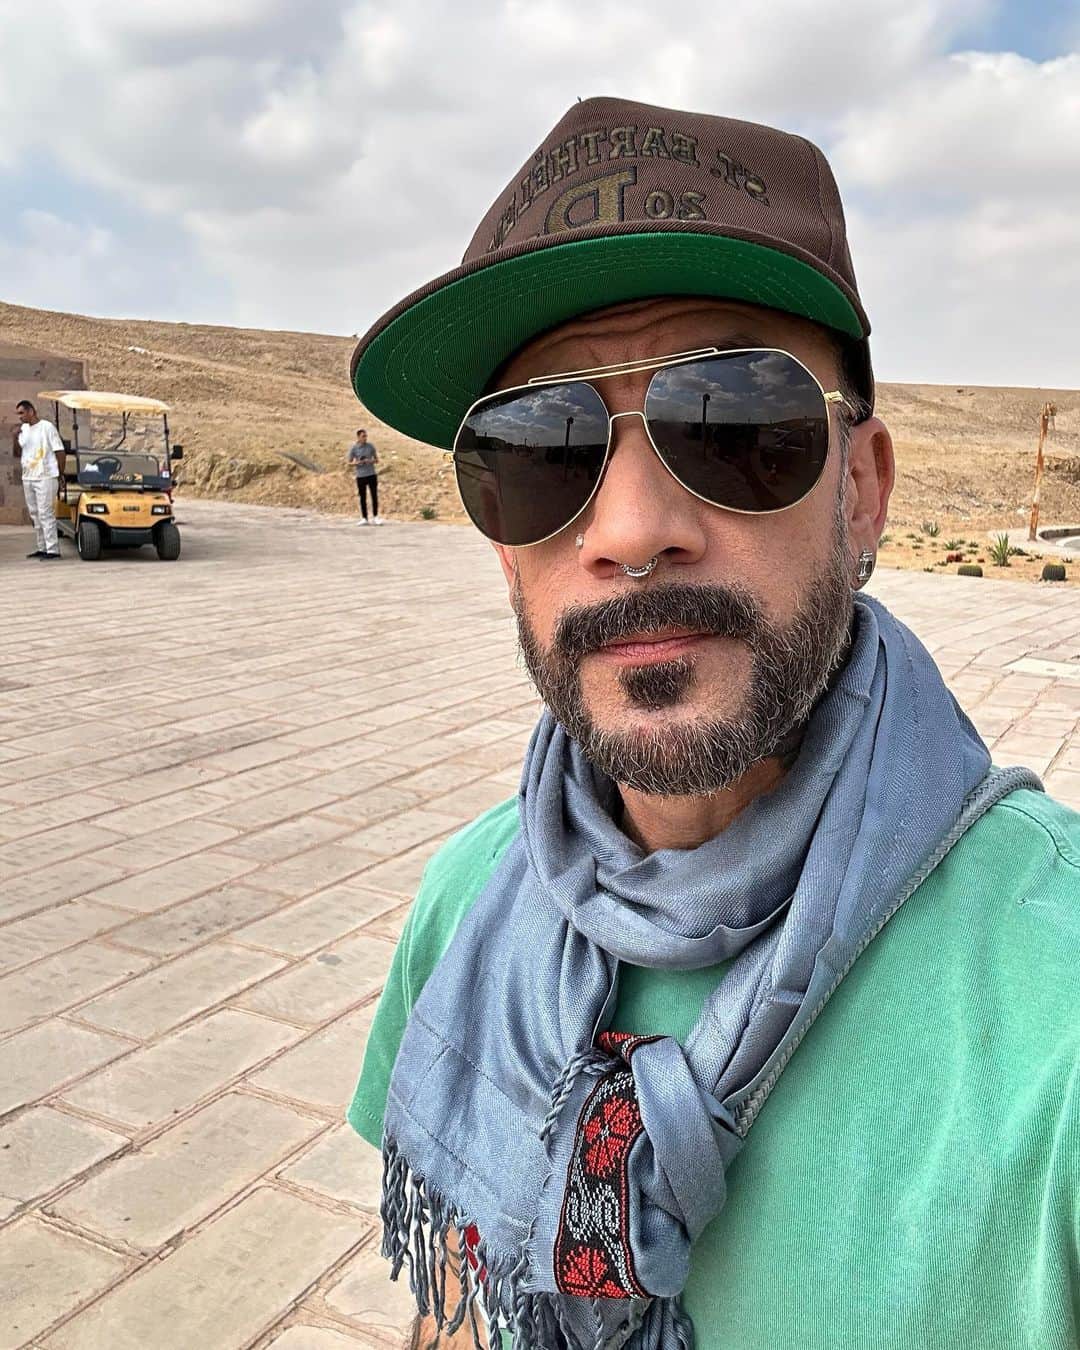 A.J.のインスタグラム：「This amazing place has been a bucket list stop for me my whole life. Ever since I saw raiders of the lost ark I have been obsessed with Egypt! The history, culture, people, the food and hoping to see the pyramids up close. Well thanks to the best job in the universe my dreams came true. Thank you to everyone that made this guys dreams come true. We will be back!!!」